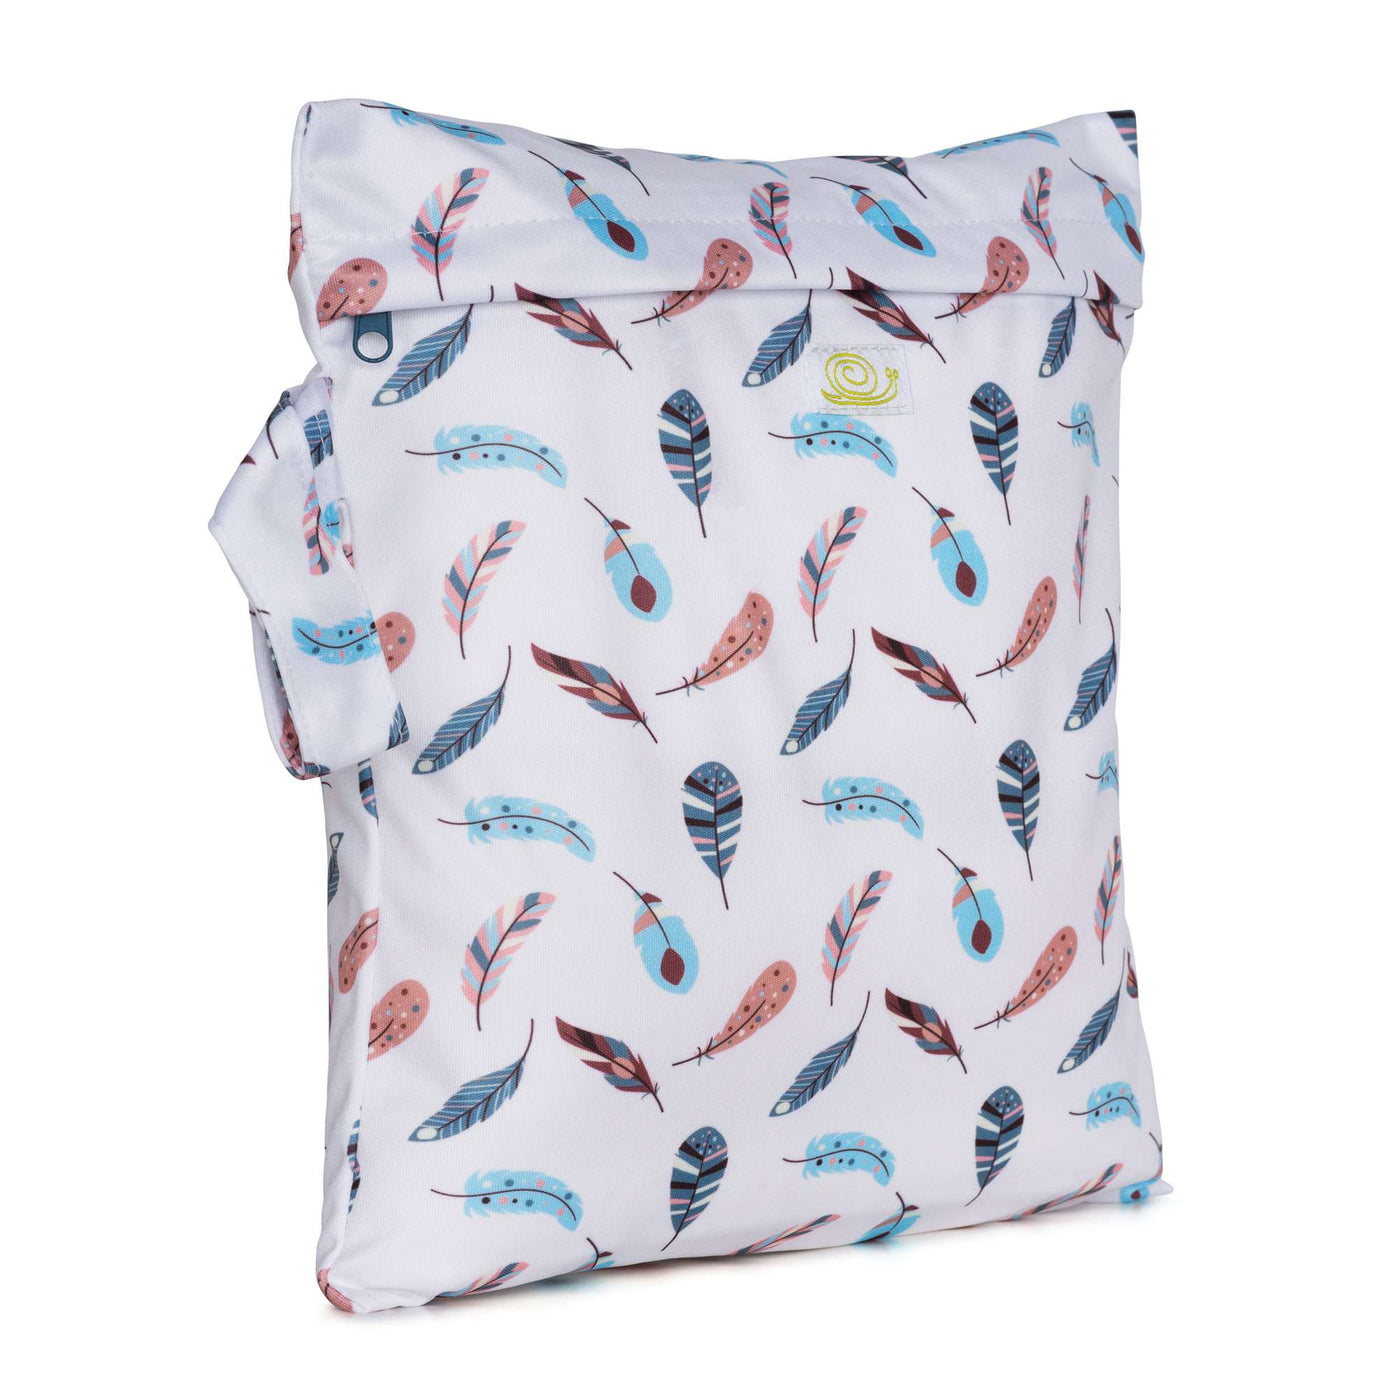 Baba+Boo Small Reusable Nappy Bag - (Hope) Feathers